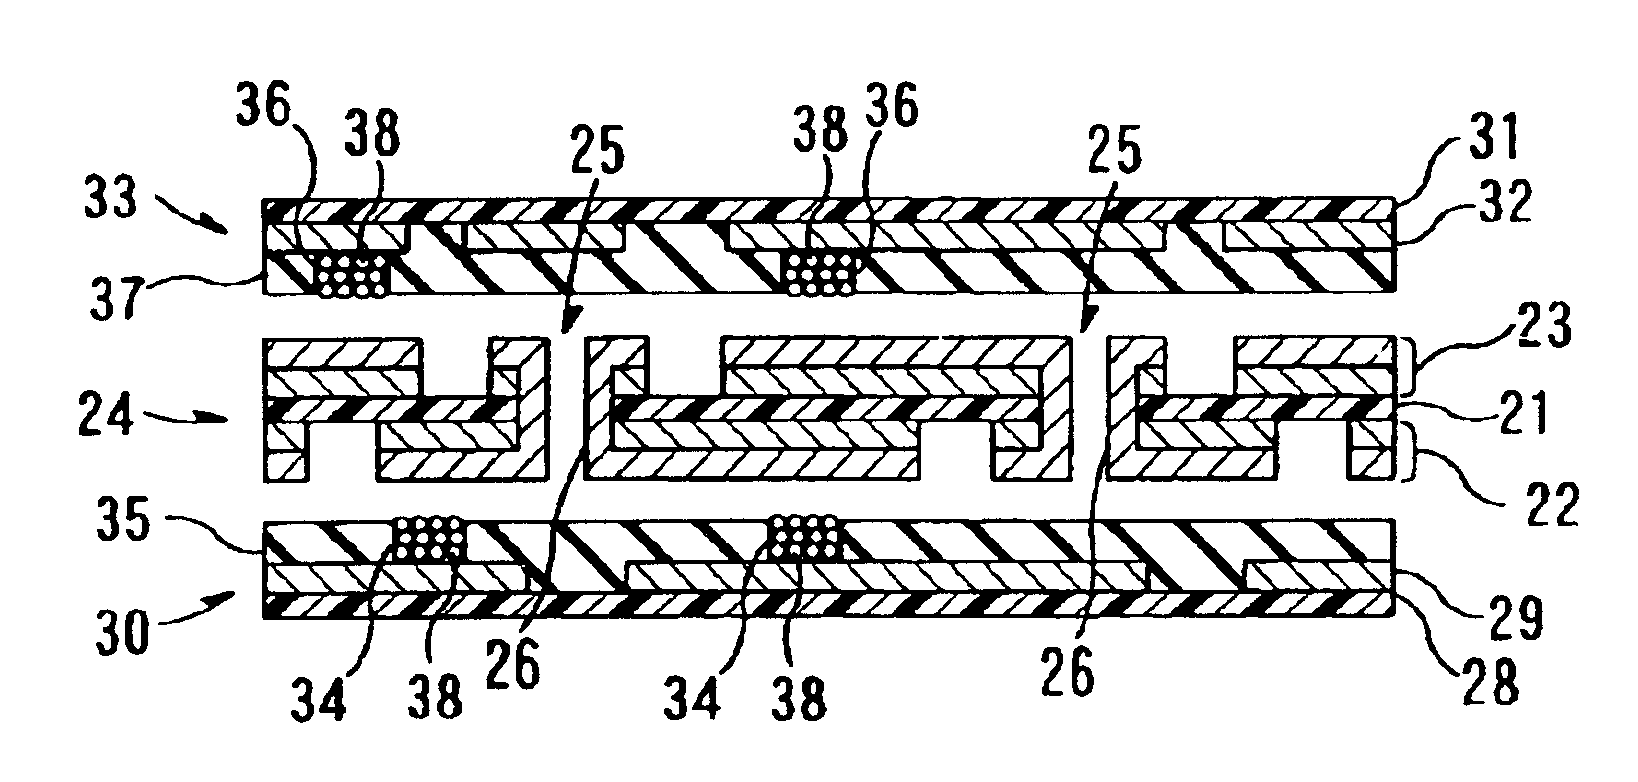 Multilayer flexible wiring circuit board and its manufacturing method